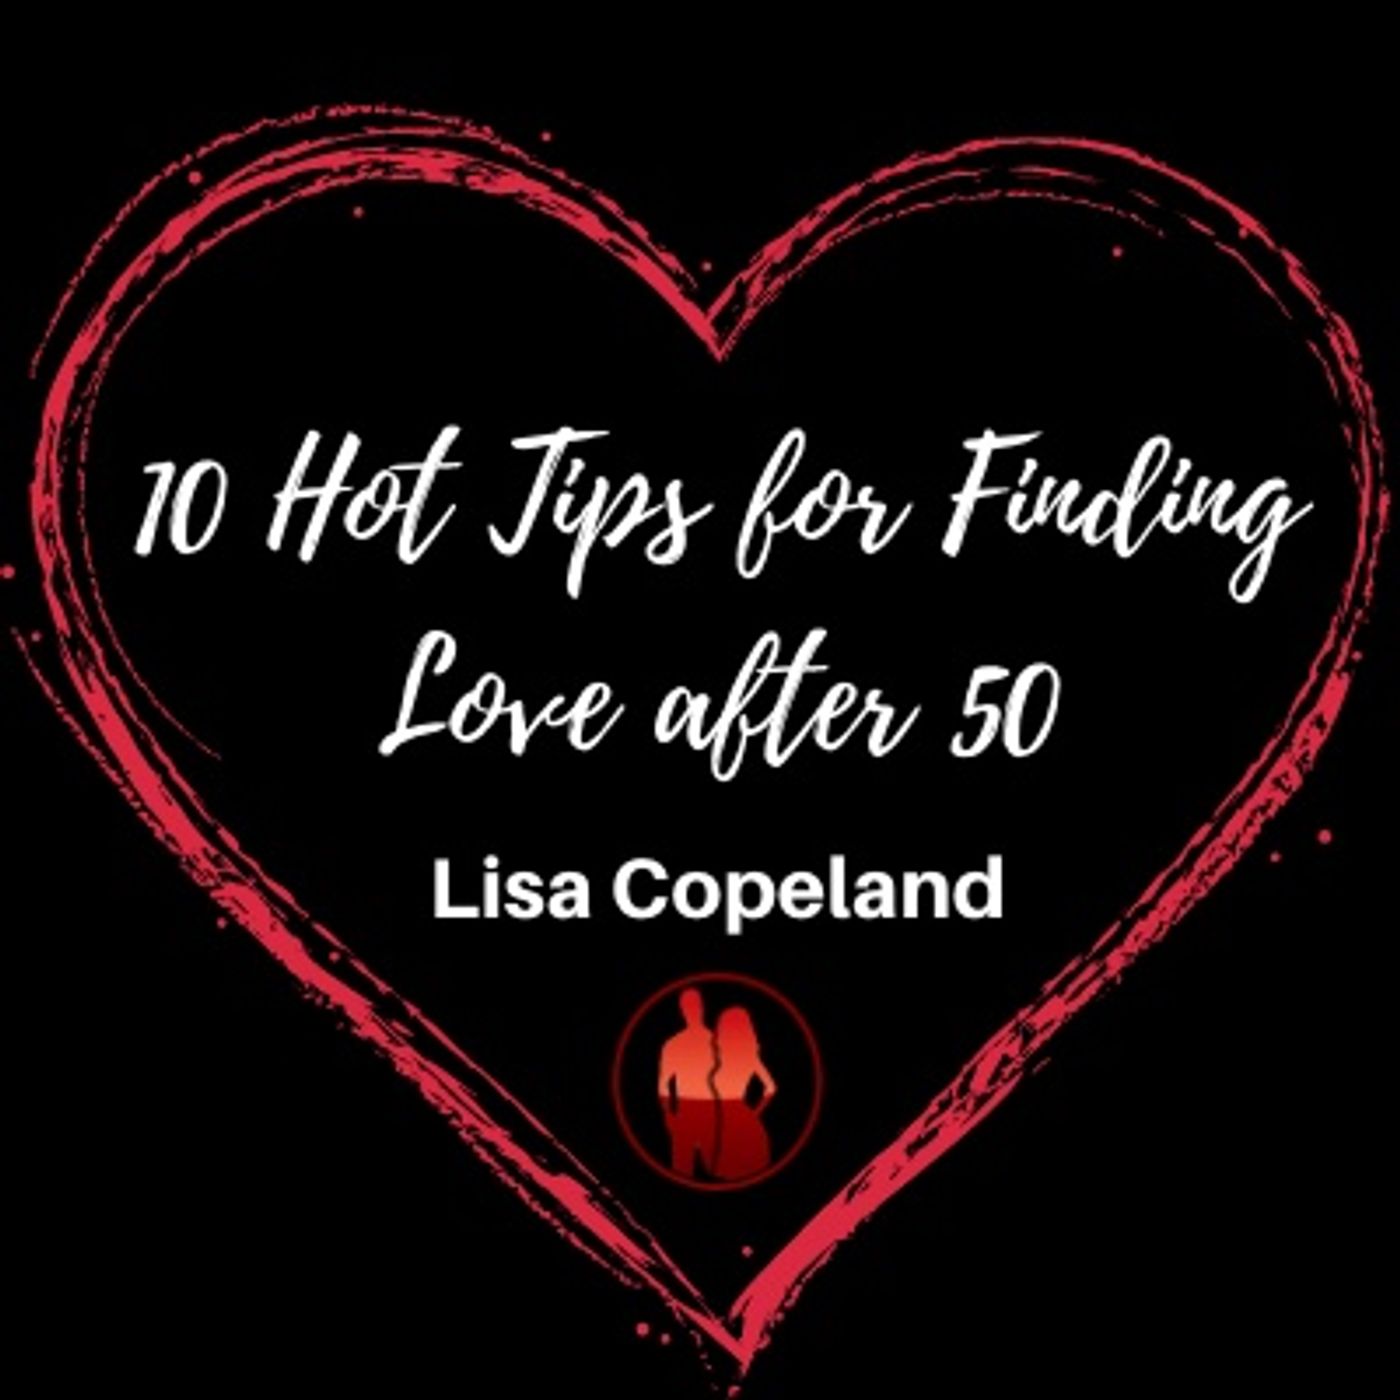 10 Hot Tips for Finding Love after 50